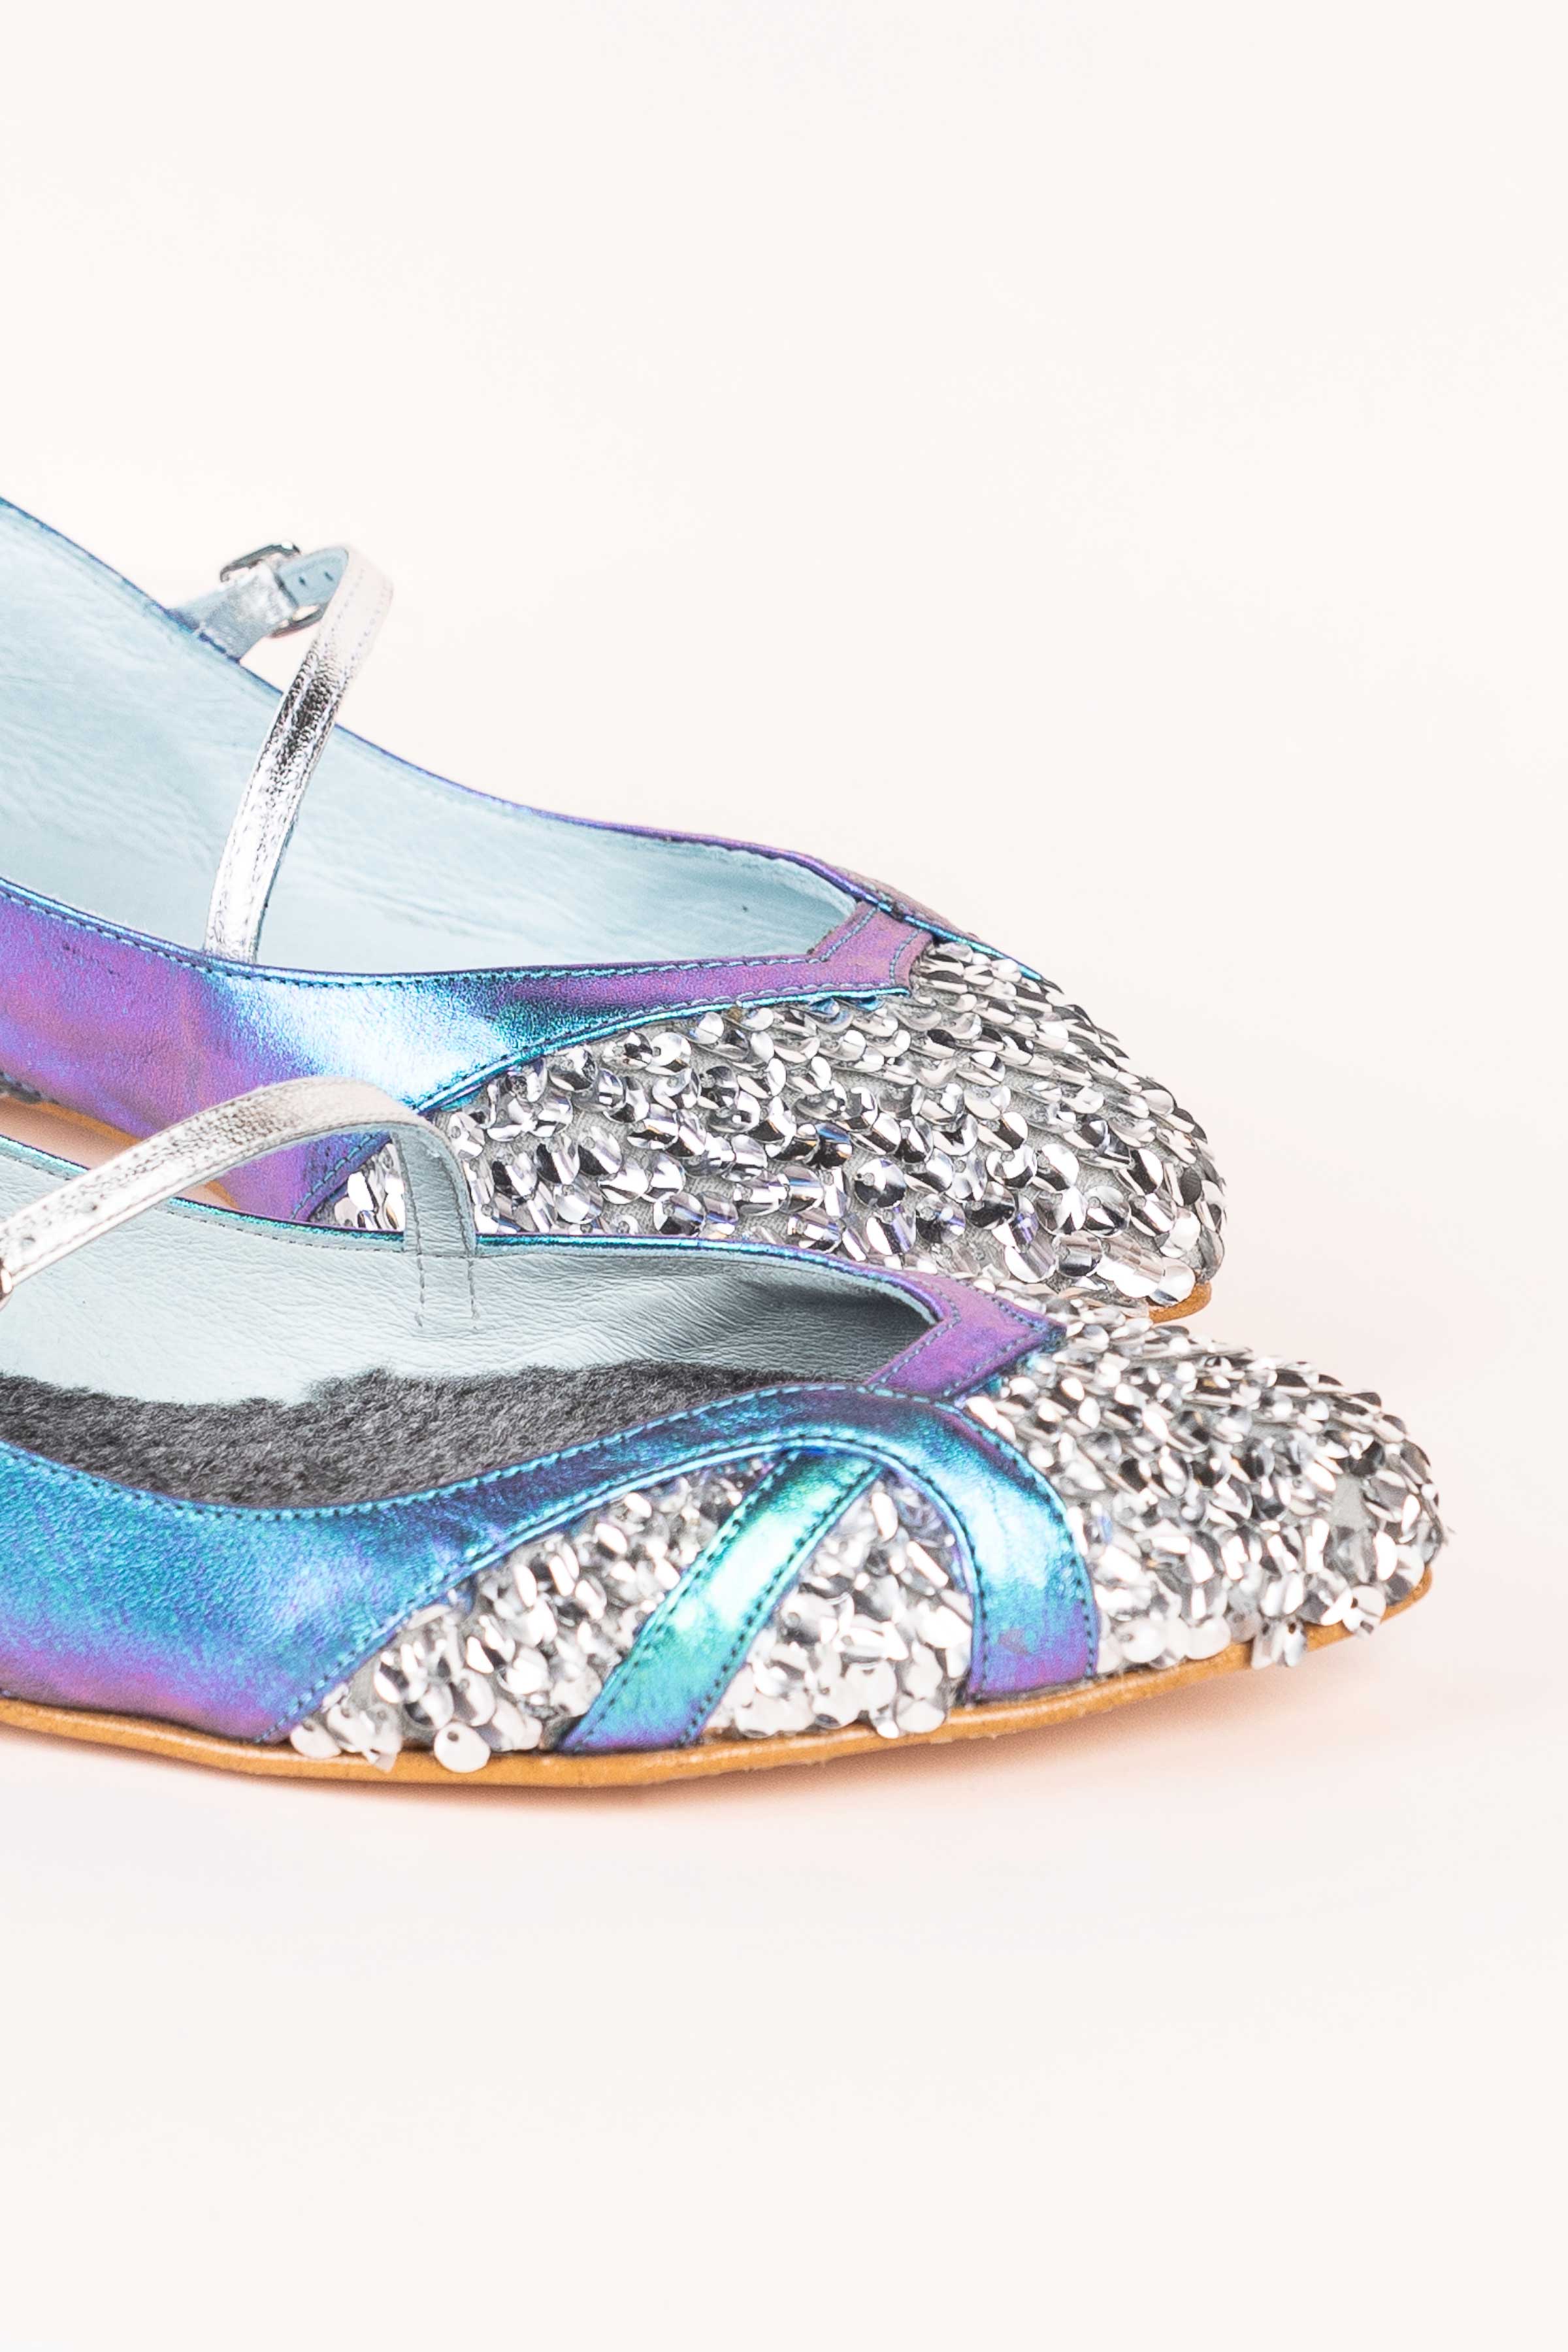 Sierra Nevada Silver Ballerina (includes wool and leather insole)